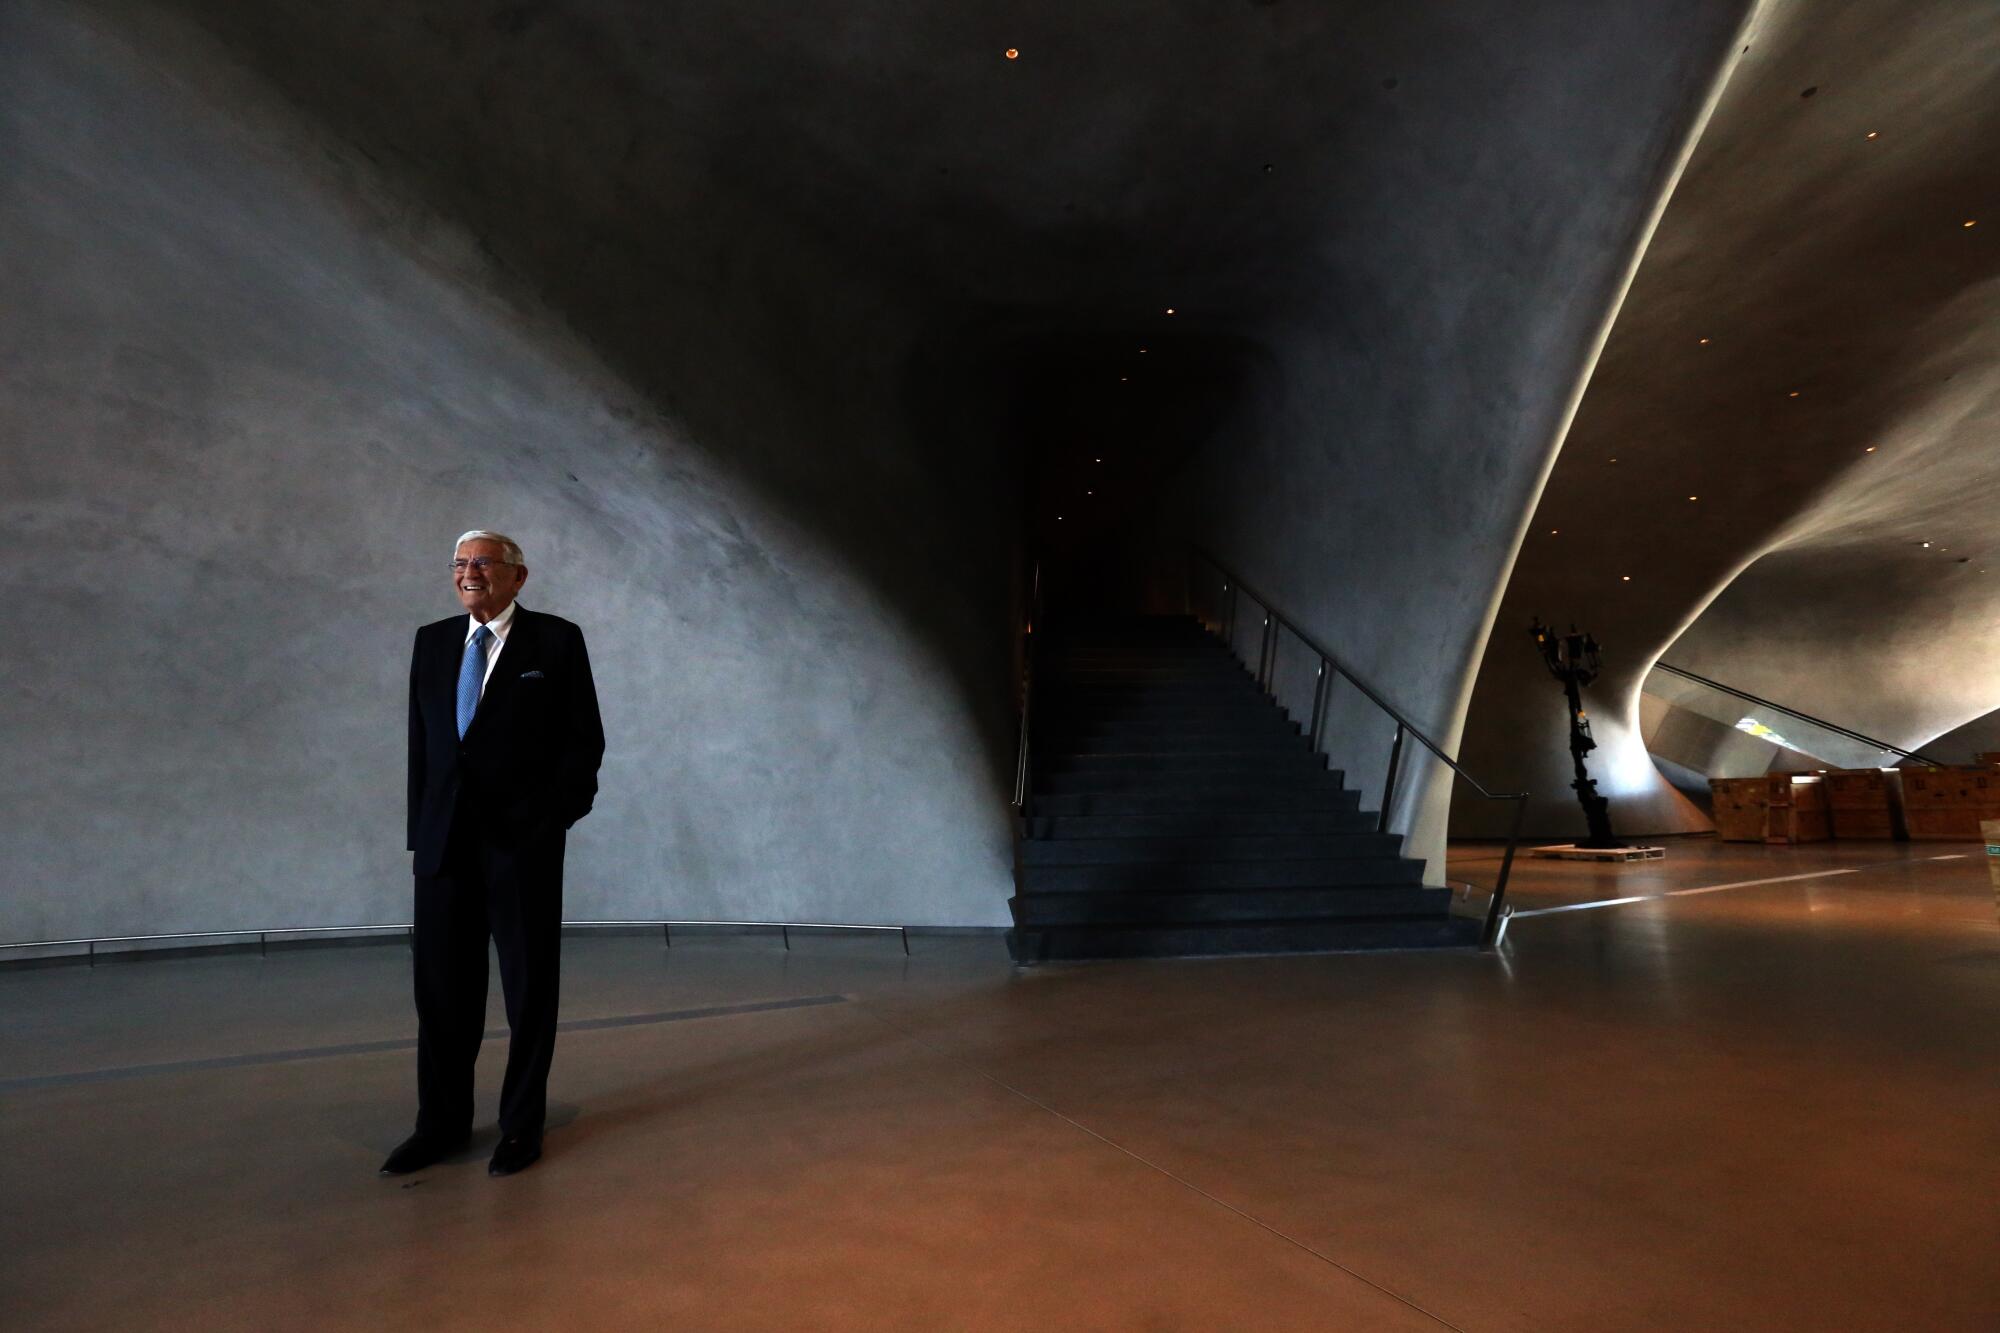 Eli Broad poses for a photo inside a cavernous space with curving, shadowed walls.